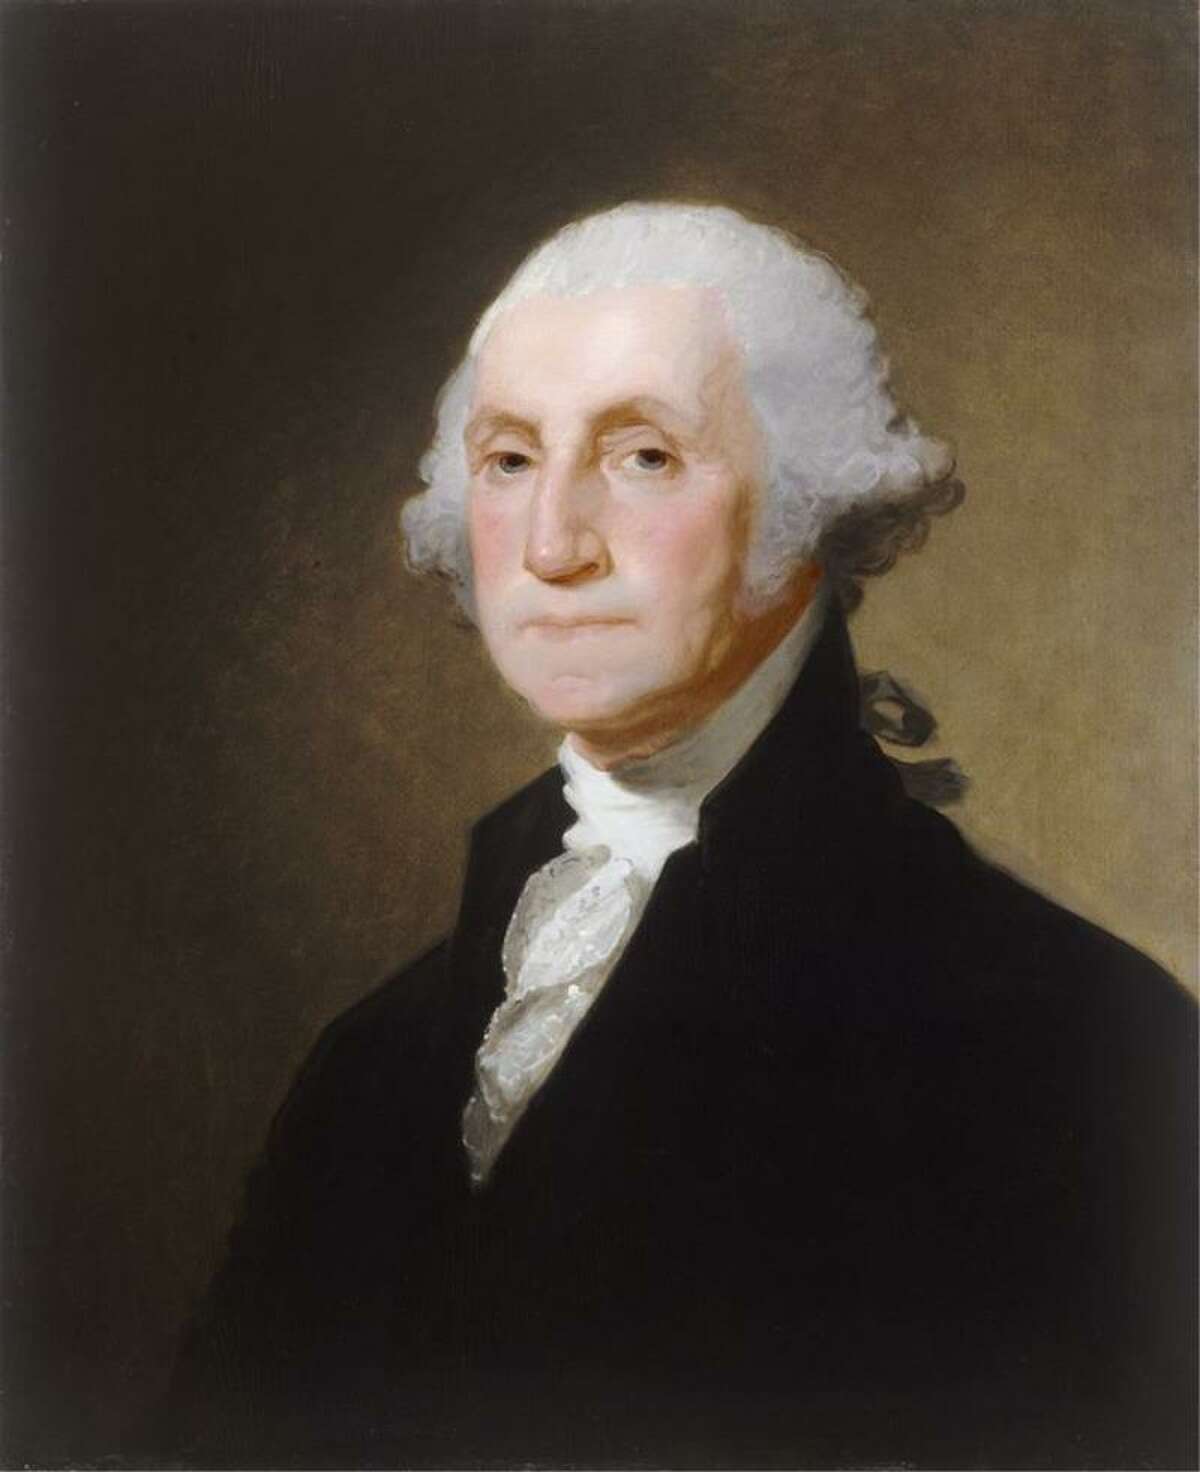 2) George Washington, c. 1821Artist: Gilbert Stuart Gilbert Stuart, a native of Rhode Island, made his reputation painting portraits of the upper classes in London and Dublin in the 1770s and 1780s. He returned to America in 1793 specifically to paint the first president’s portrait. George Washington sat for Stuart three times, and Stuart made numerous copies for eager patrons. This version is among the best of the 72 copies Stuart made of his Athenaeum format. In his lifetime, Stuart painted over 1,000 portraits.